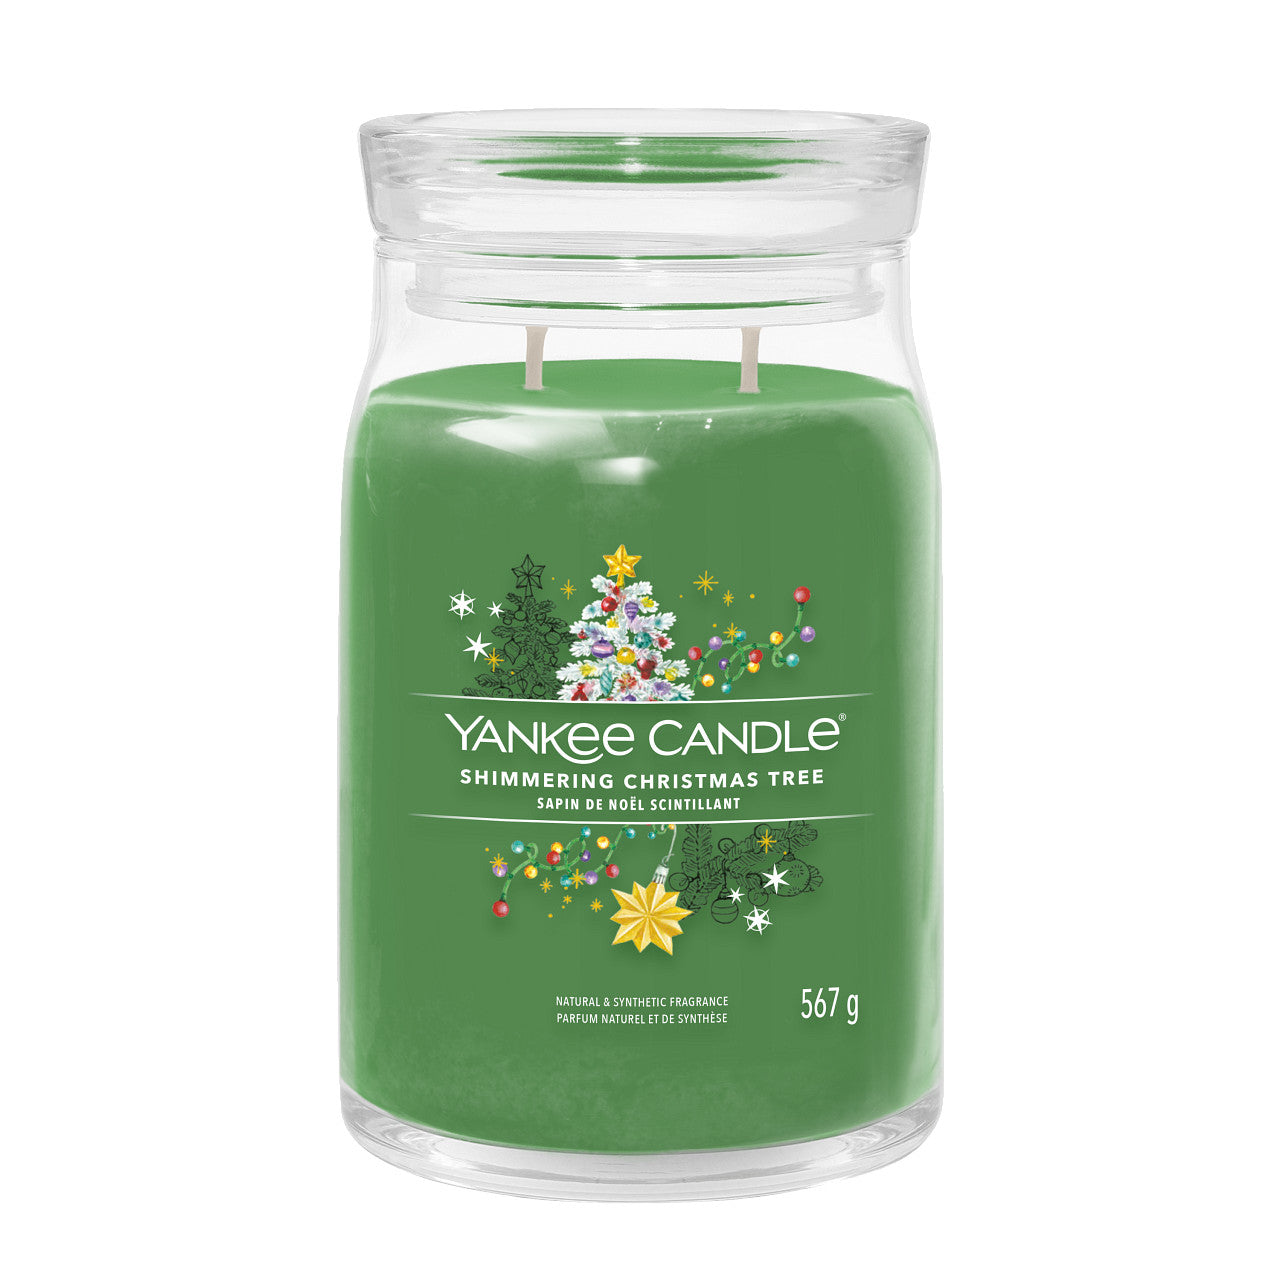 Shimmering Christmas Tree - Signature Large Jar Scented Candle